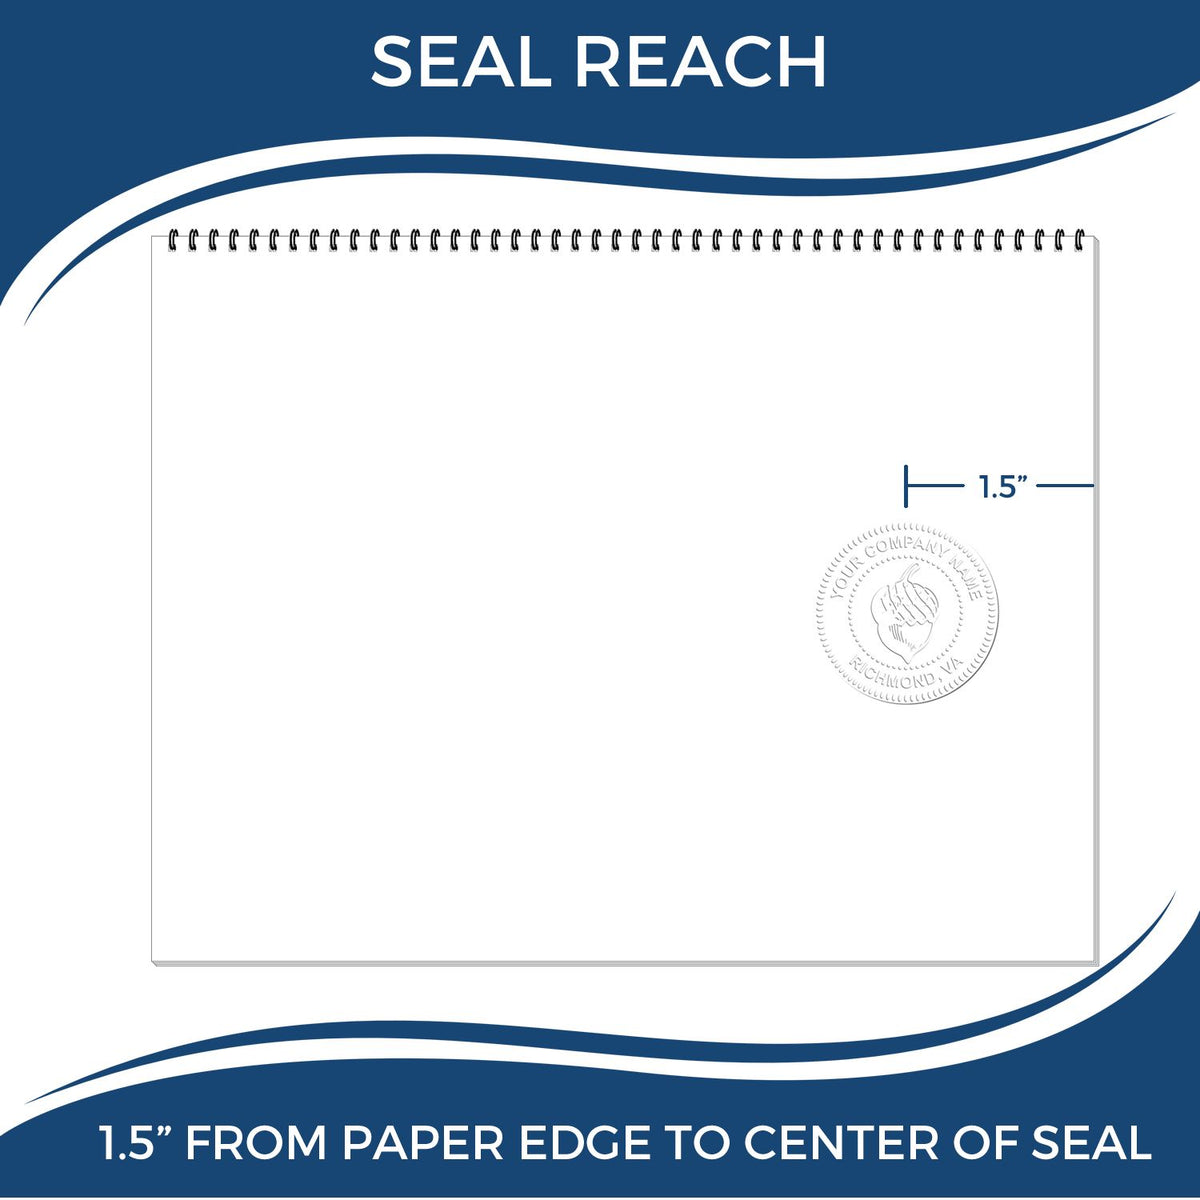 An infographic showing the seal reach which is represented by a ruler and a miniature seal image of the Soft Pocket New Jersey Landscape Architect Embosser